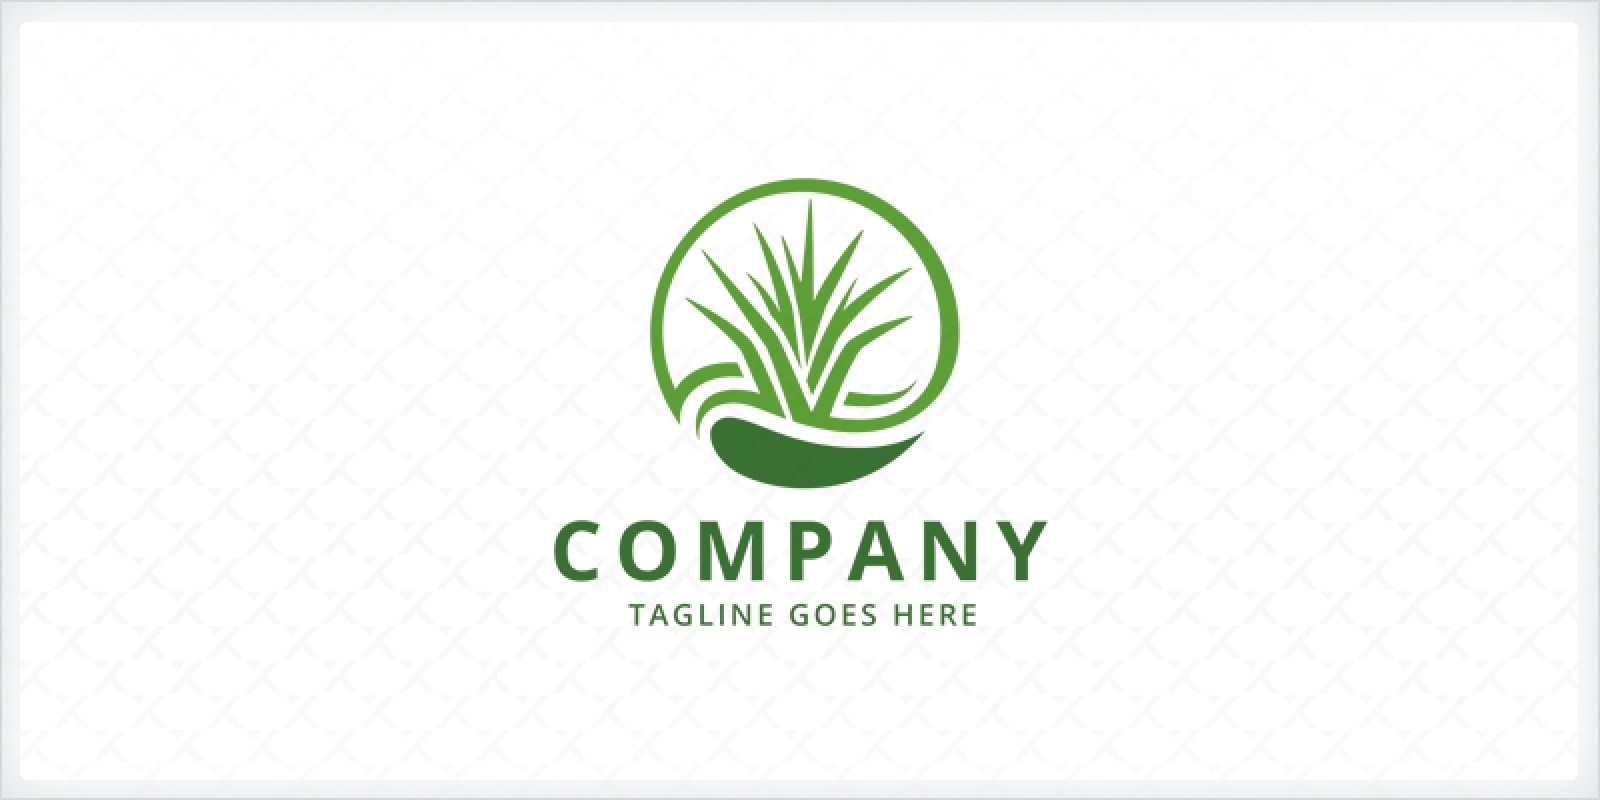 Turf Grass - Landscaping Logo Template by Zixlo | Codester